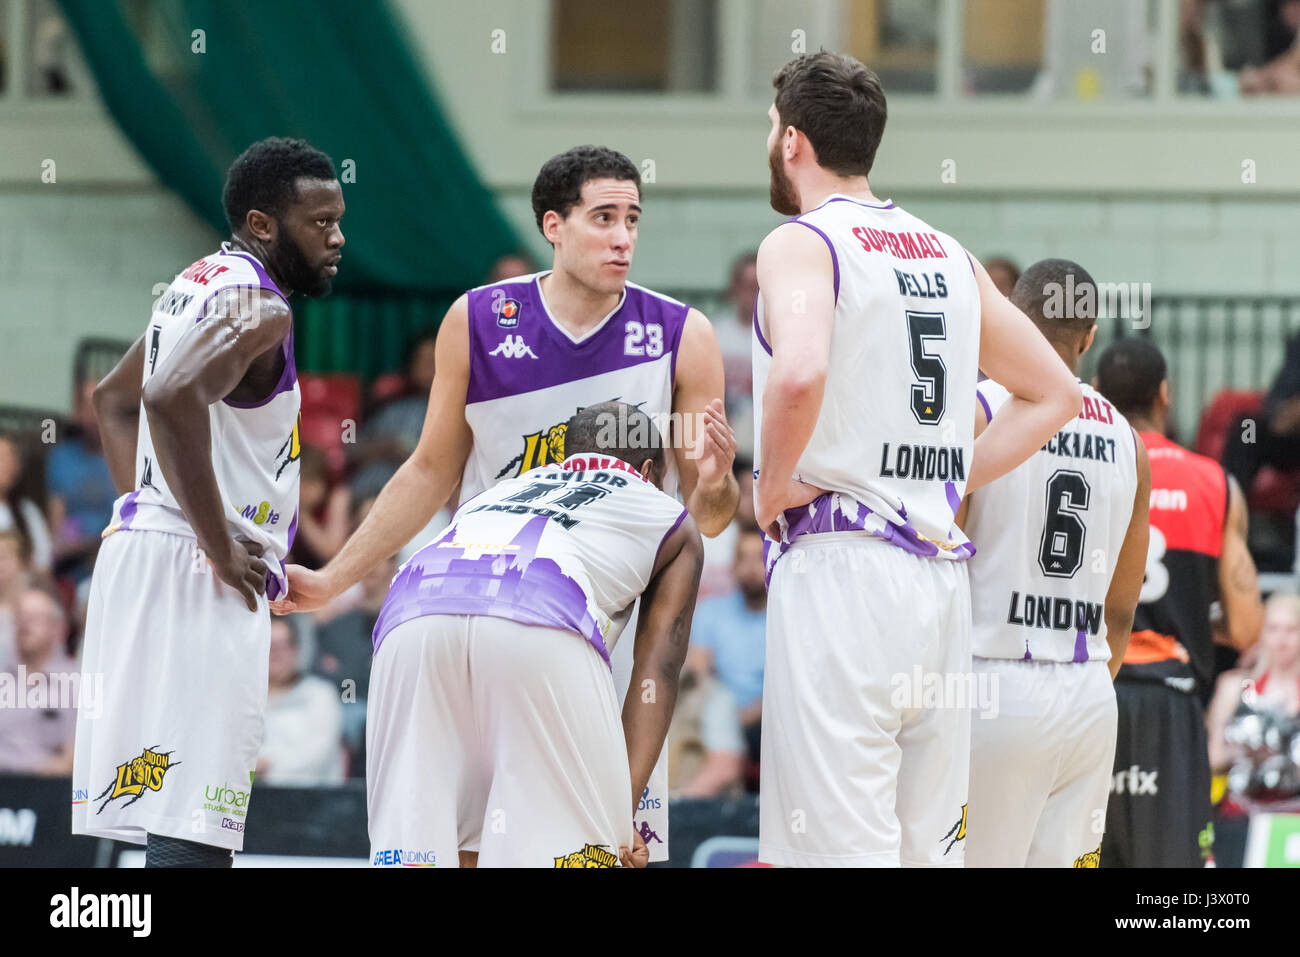 Leicester, UK, 7 May 2017.  The BBL 2nd Leg Semi Final Leicester Riders vs London Lions held in the Leicester Arena, Riders win 72 vs Lions 55 progressing to the final. London Lion's  mates Joe Ikhinmwin (07), Zac Wells (05) , Andre Lockhart (06) Zaire Taylor (11)  and Kai Williams (23) discuss tactics.  ©pmgimaging/Alamy Live News Stock Photo